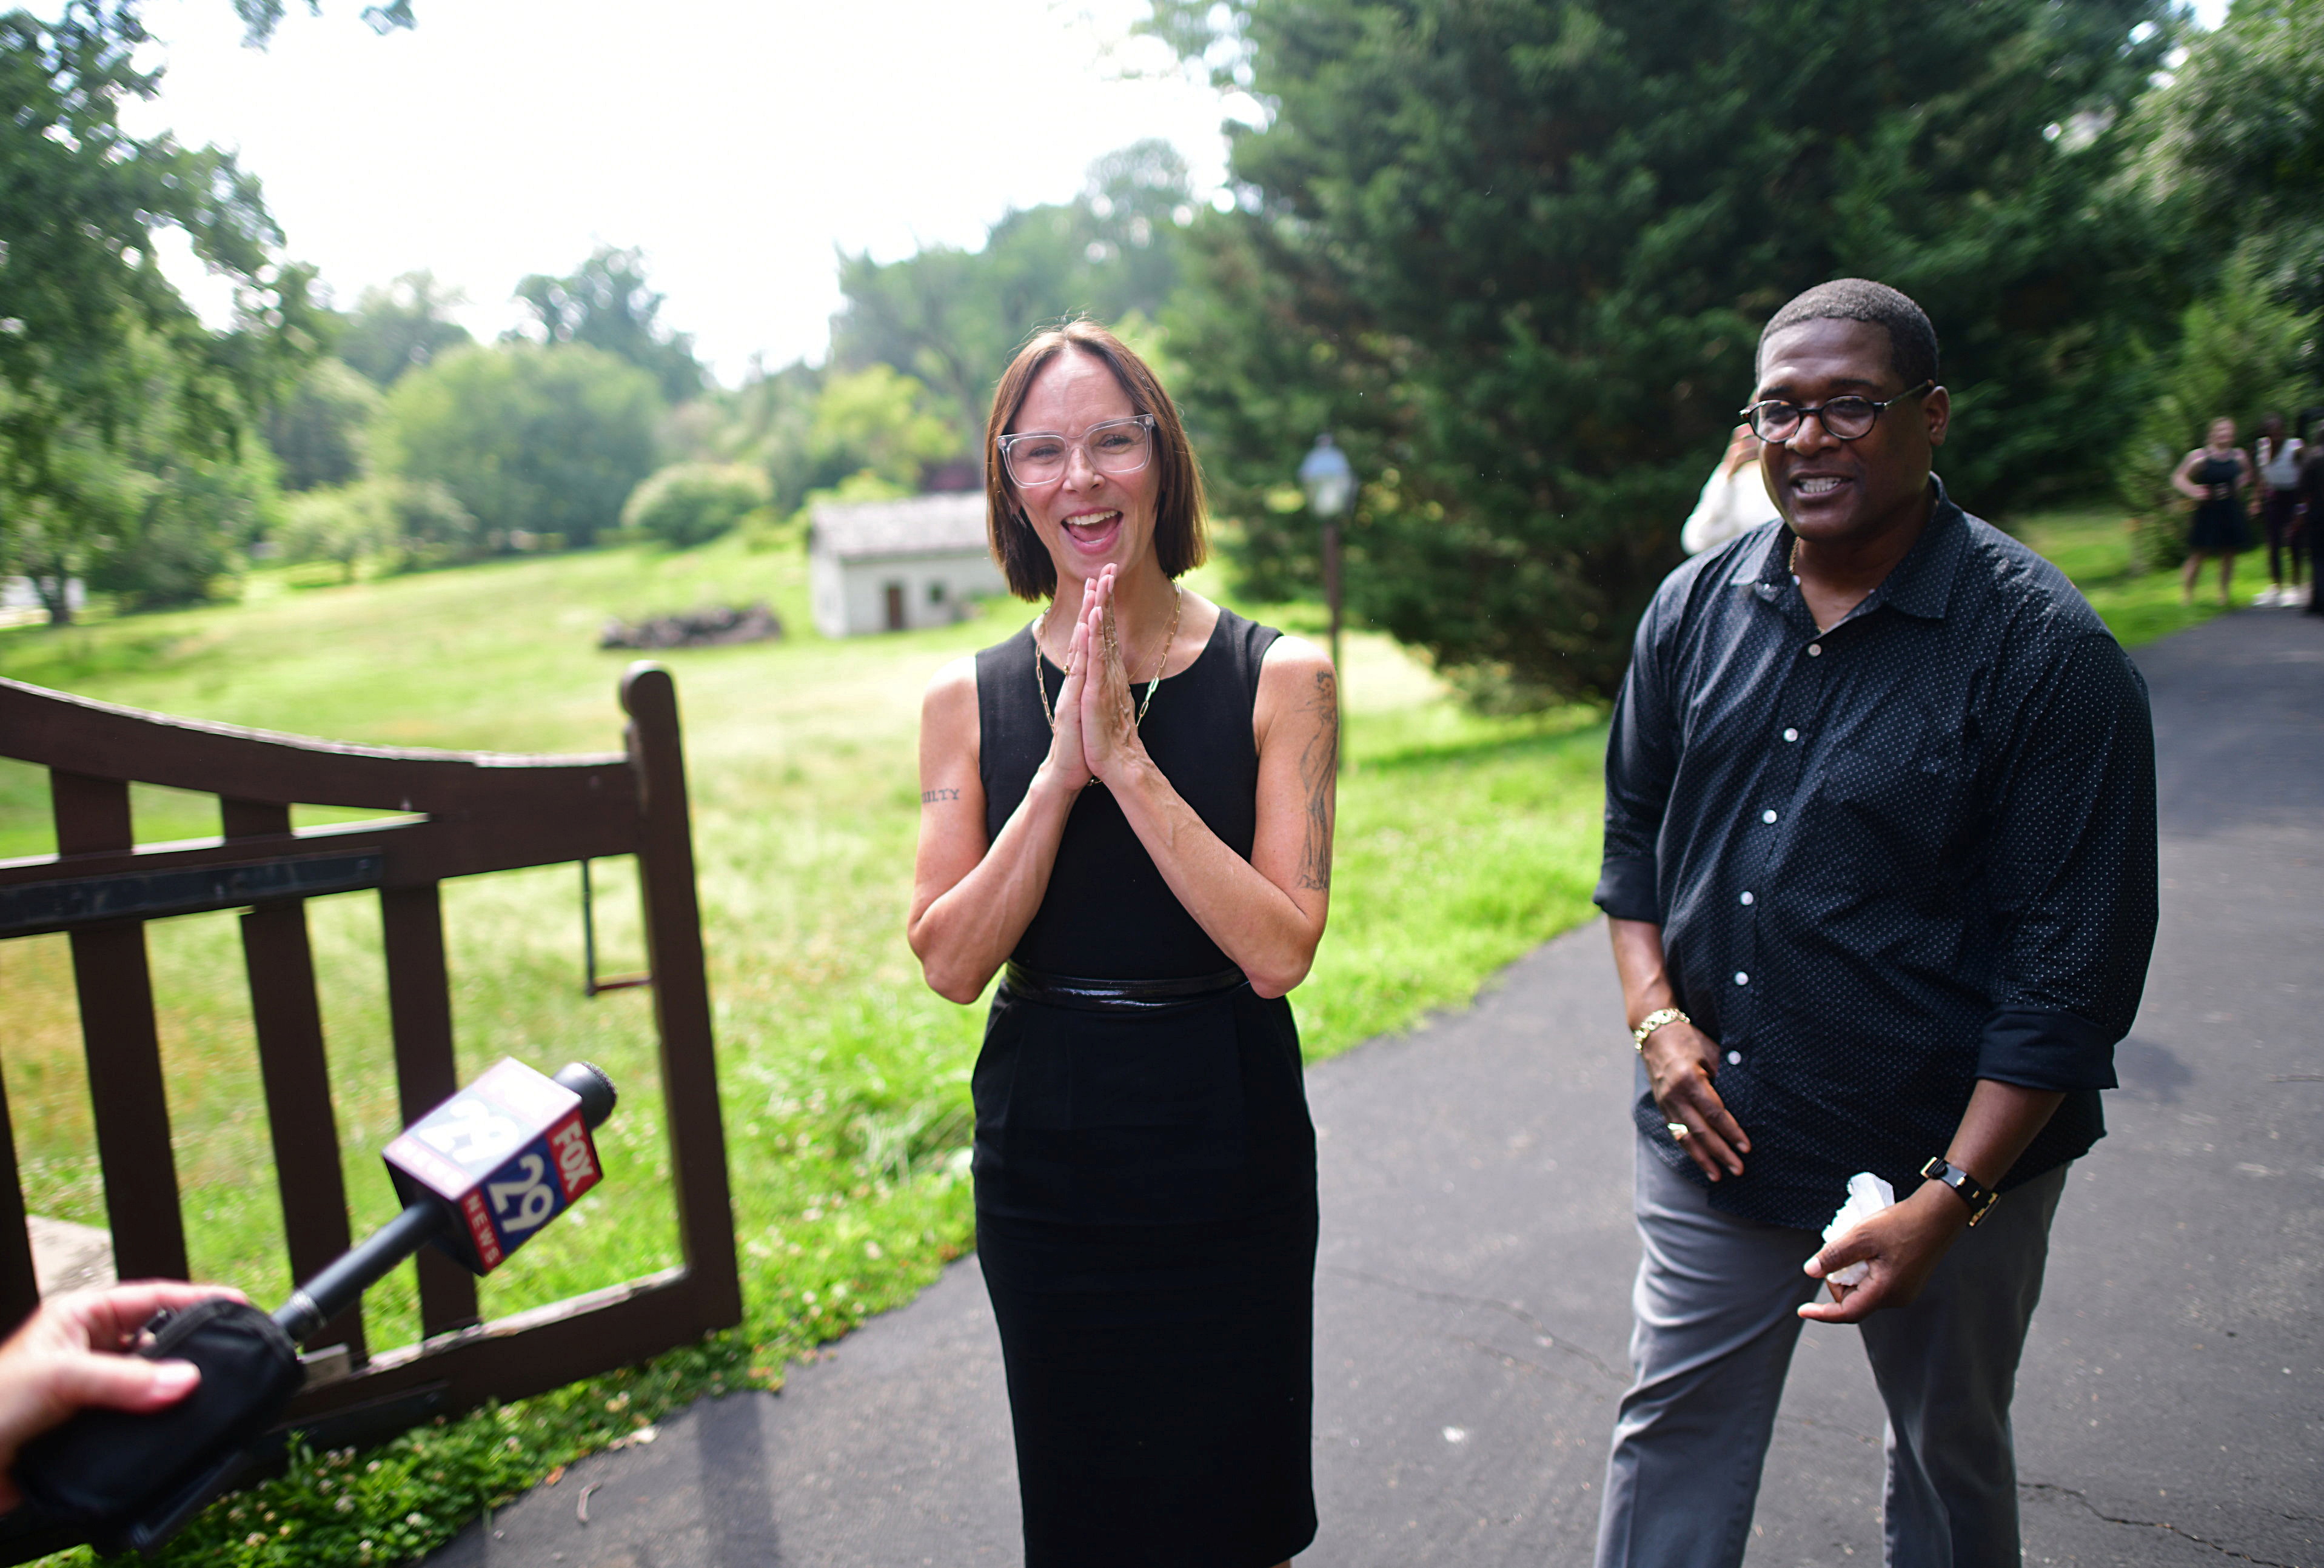 Lawyer Jennifer Bonjean and Andrew Wyatt, spokesperson for Bill Cosby, speak to the media after Pennsylvania's highest court overturned Cosby's sexual assault conviction and ordered him released from prison immediately, in Elkins Park, Pennsylvania, U.S., June 30, 2021.  REUTERS/Mark Makela